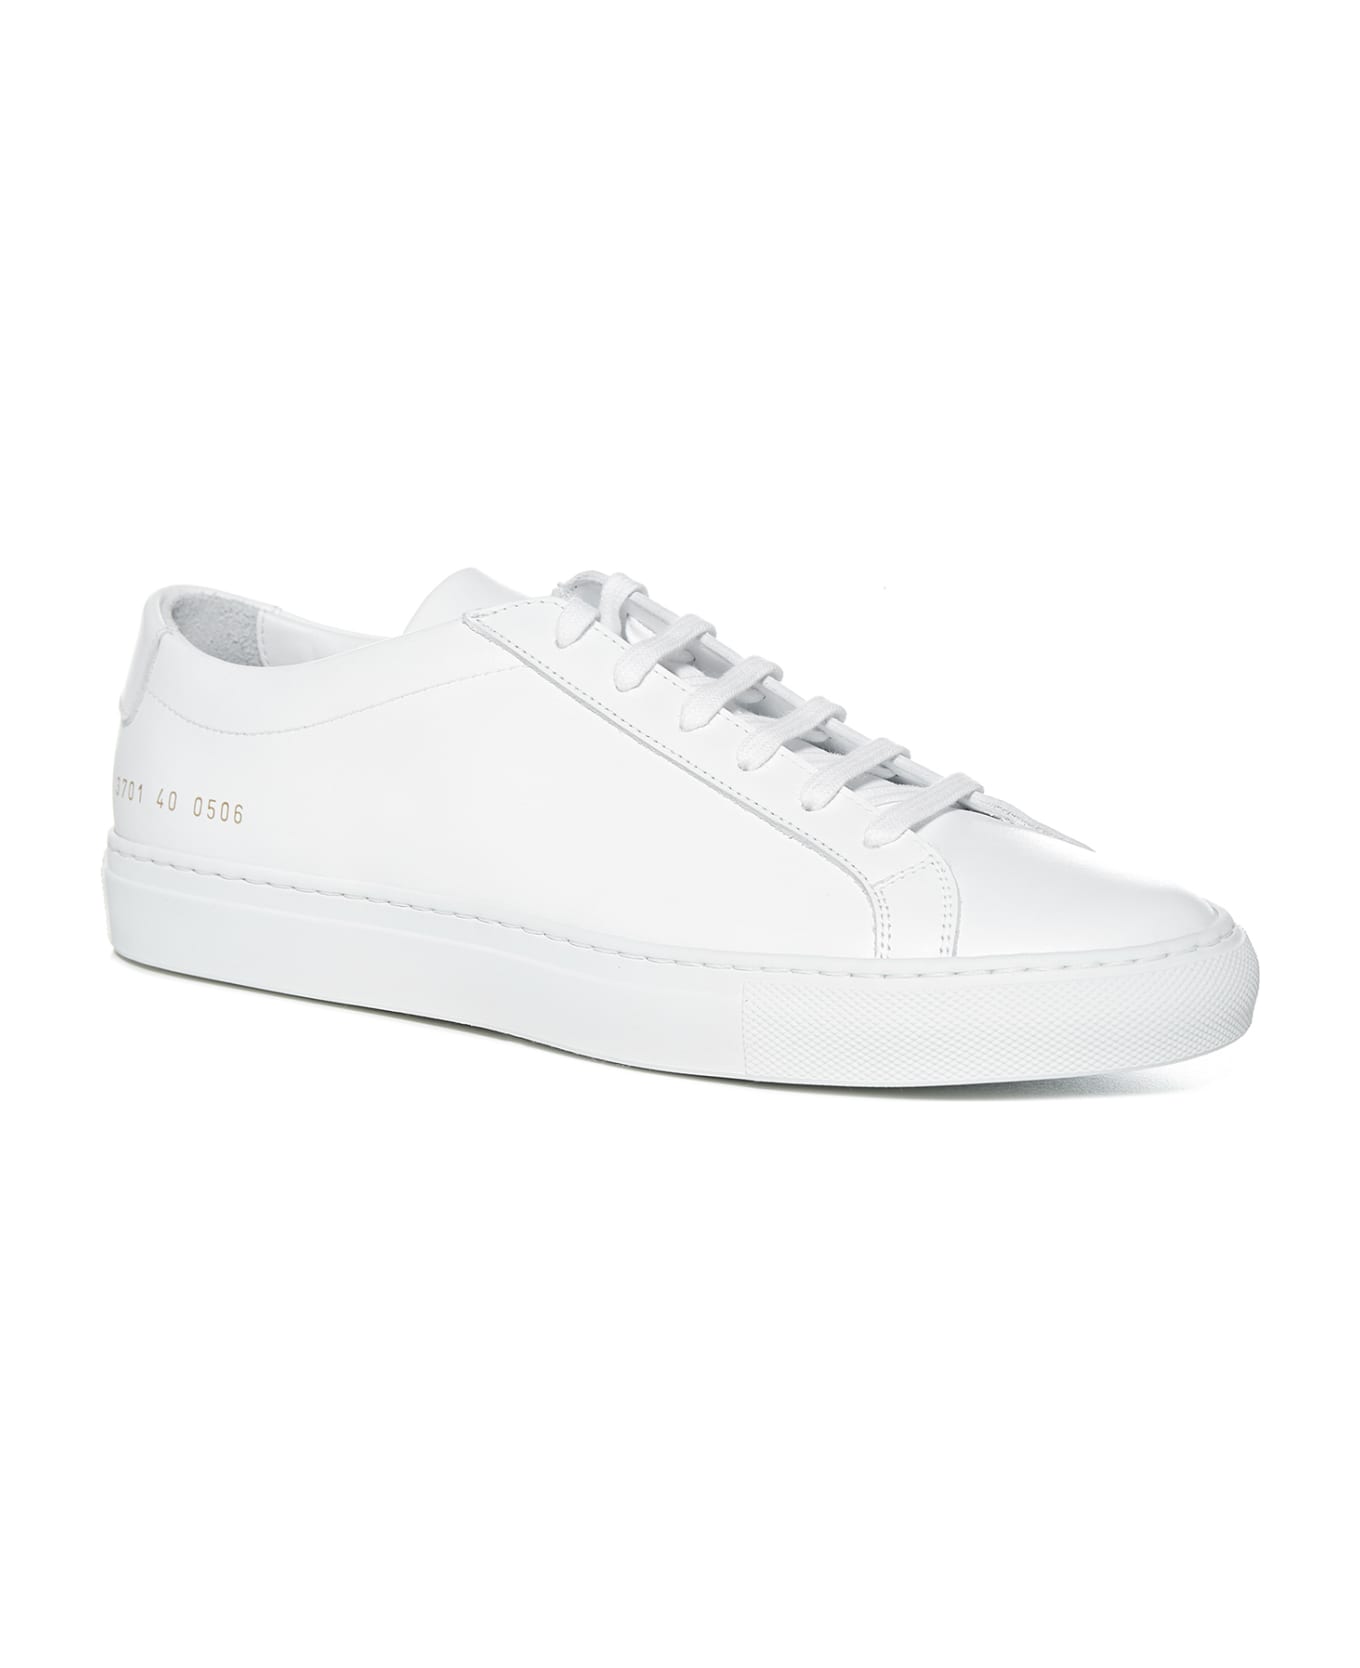 Common Projects Original Achilles Sneakers - White